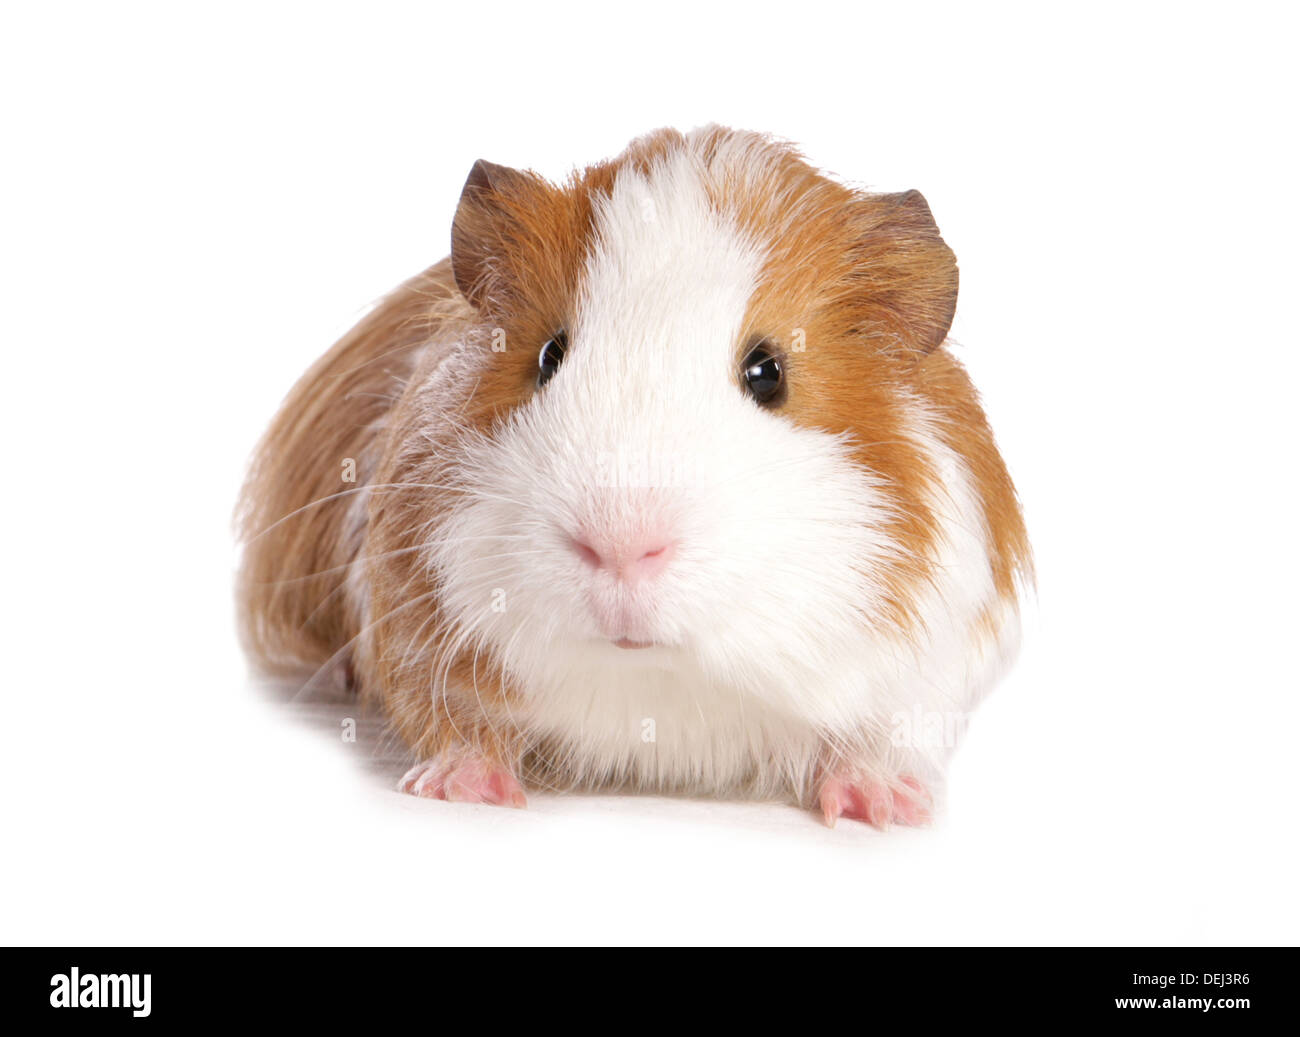 Ginger and white guinea pig in a studio 